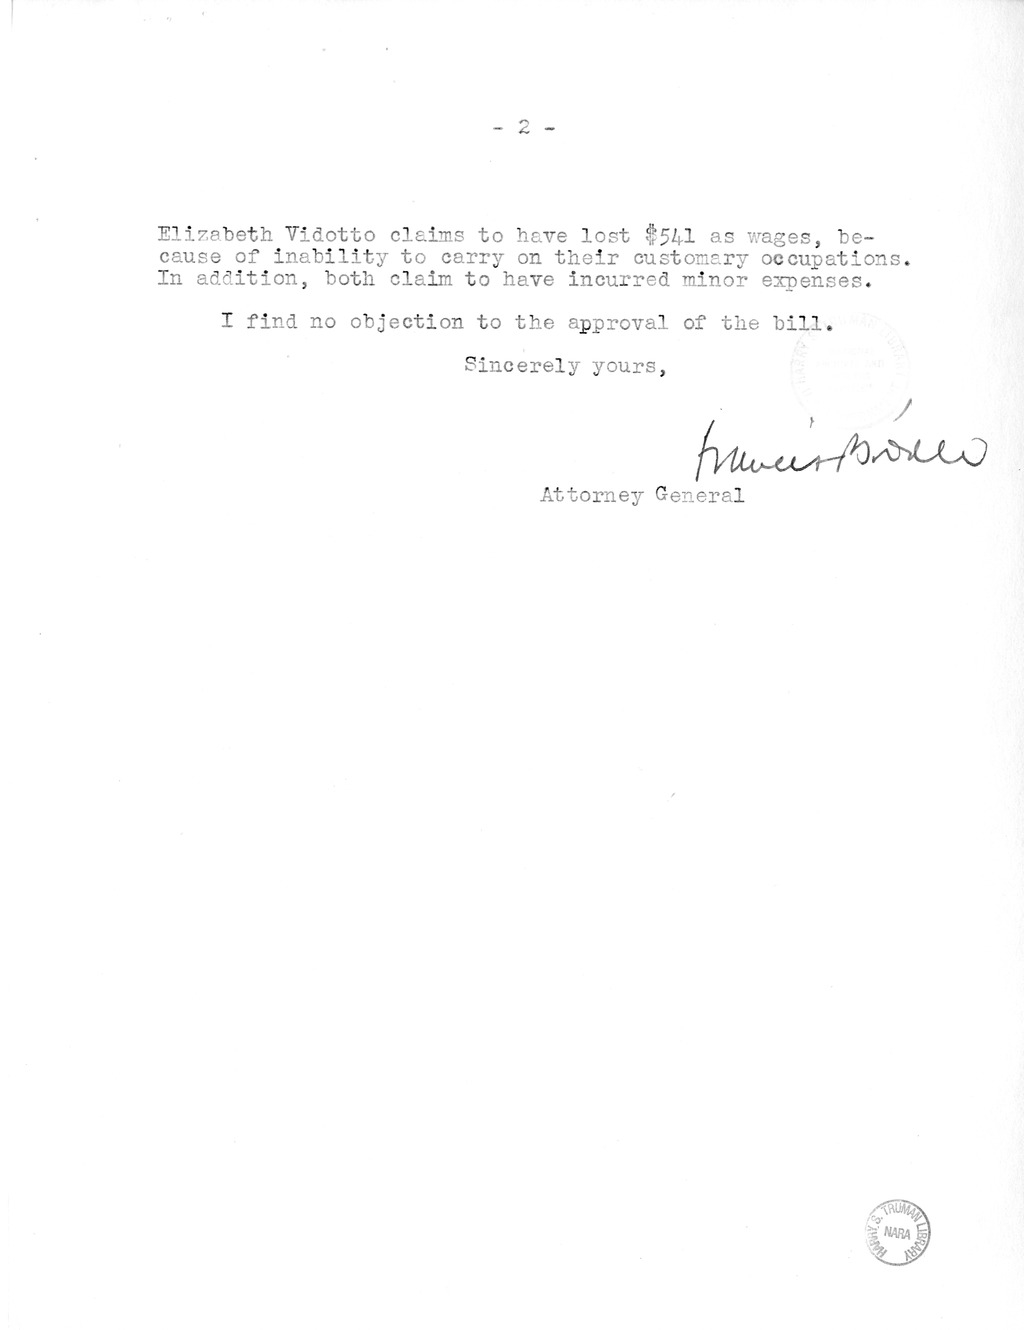 Memorandum from Frederick J. Bailey to M. C. Latta, H.R. 1910, For the Relief of Frank Lore and Elizabeth Vidotto, with Attachments